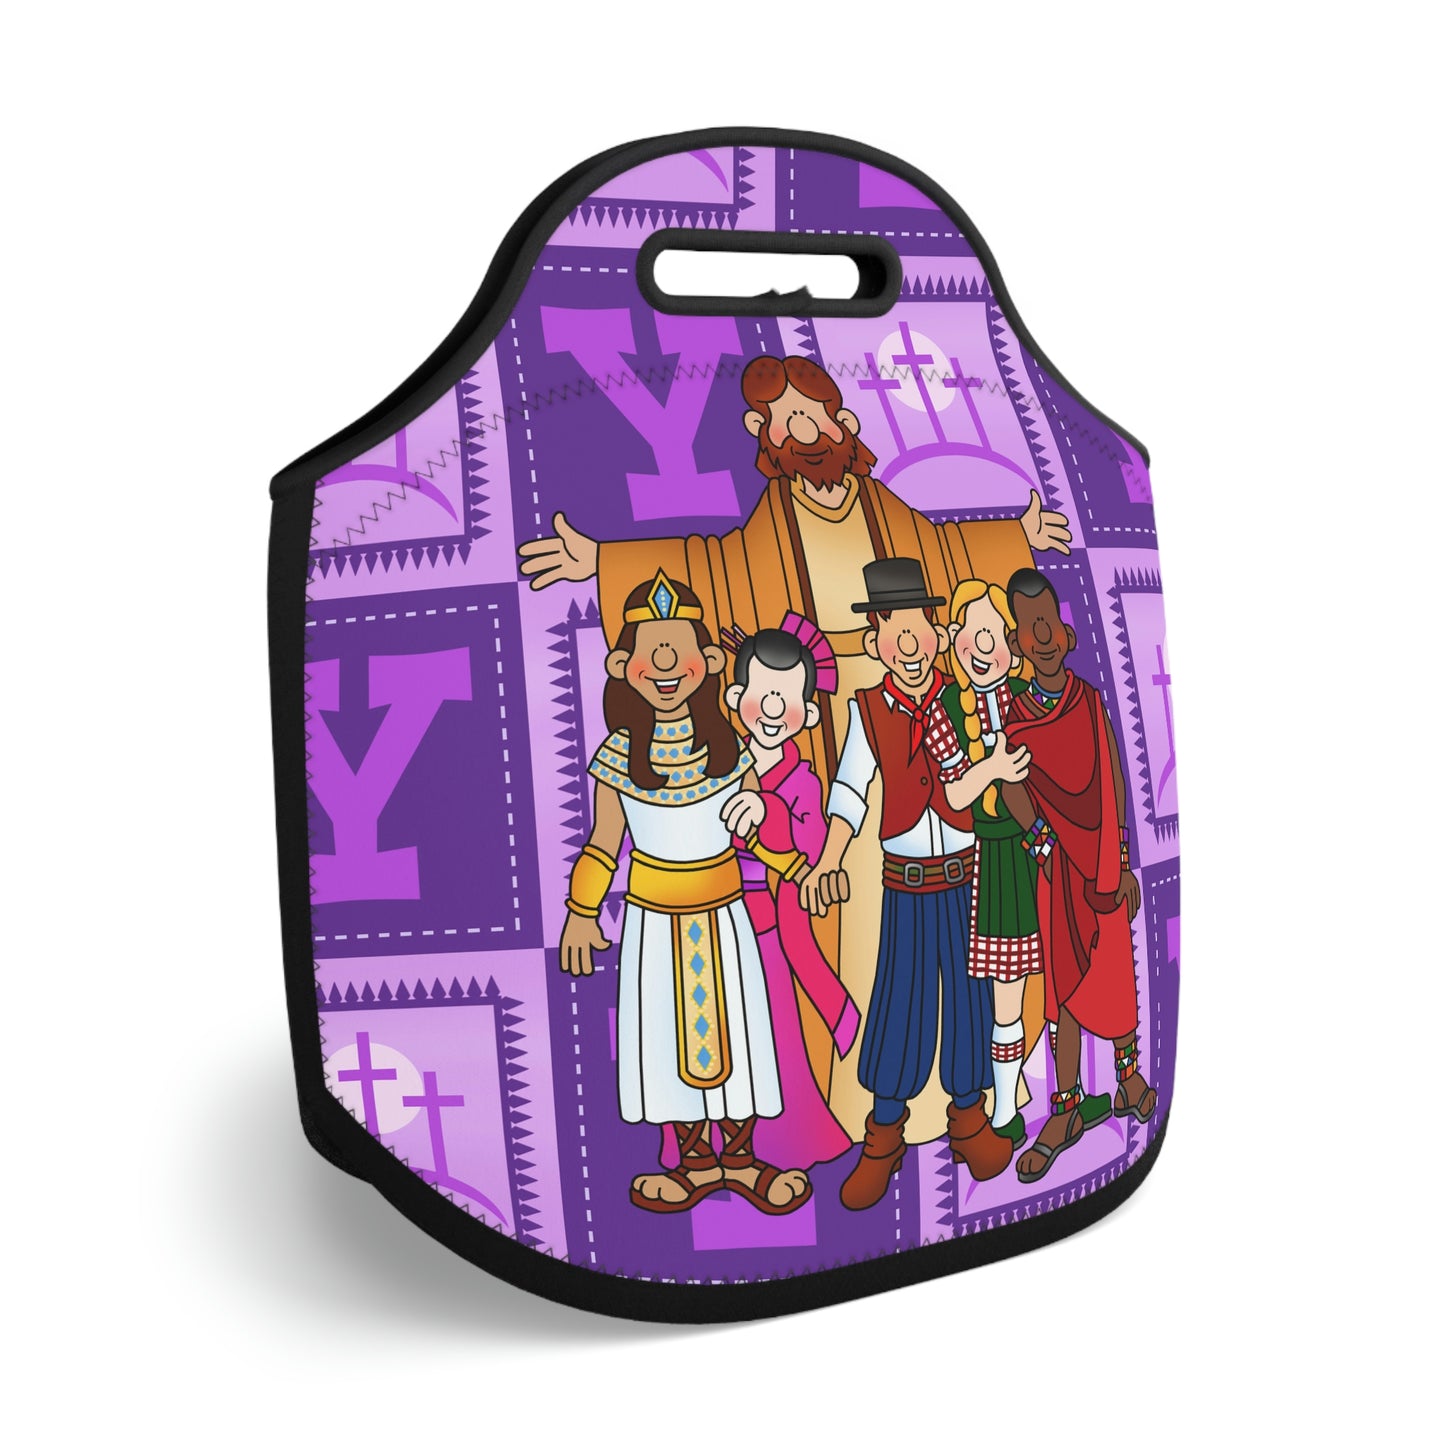 The Bible as Simple as ABC Y Neoprene Lunch Bag